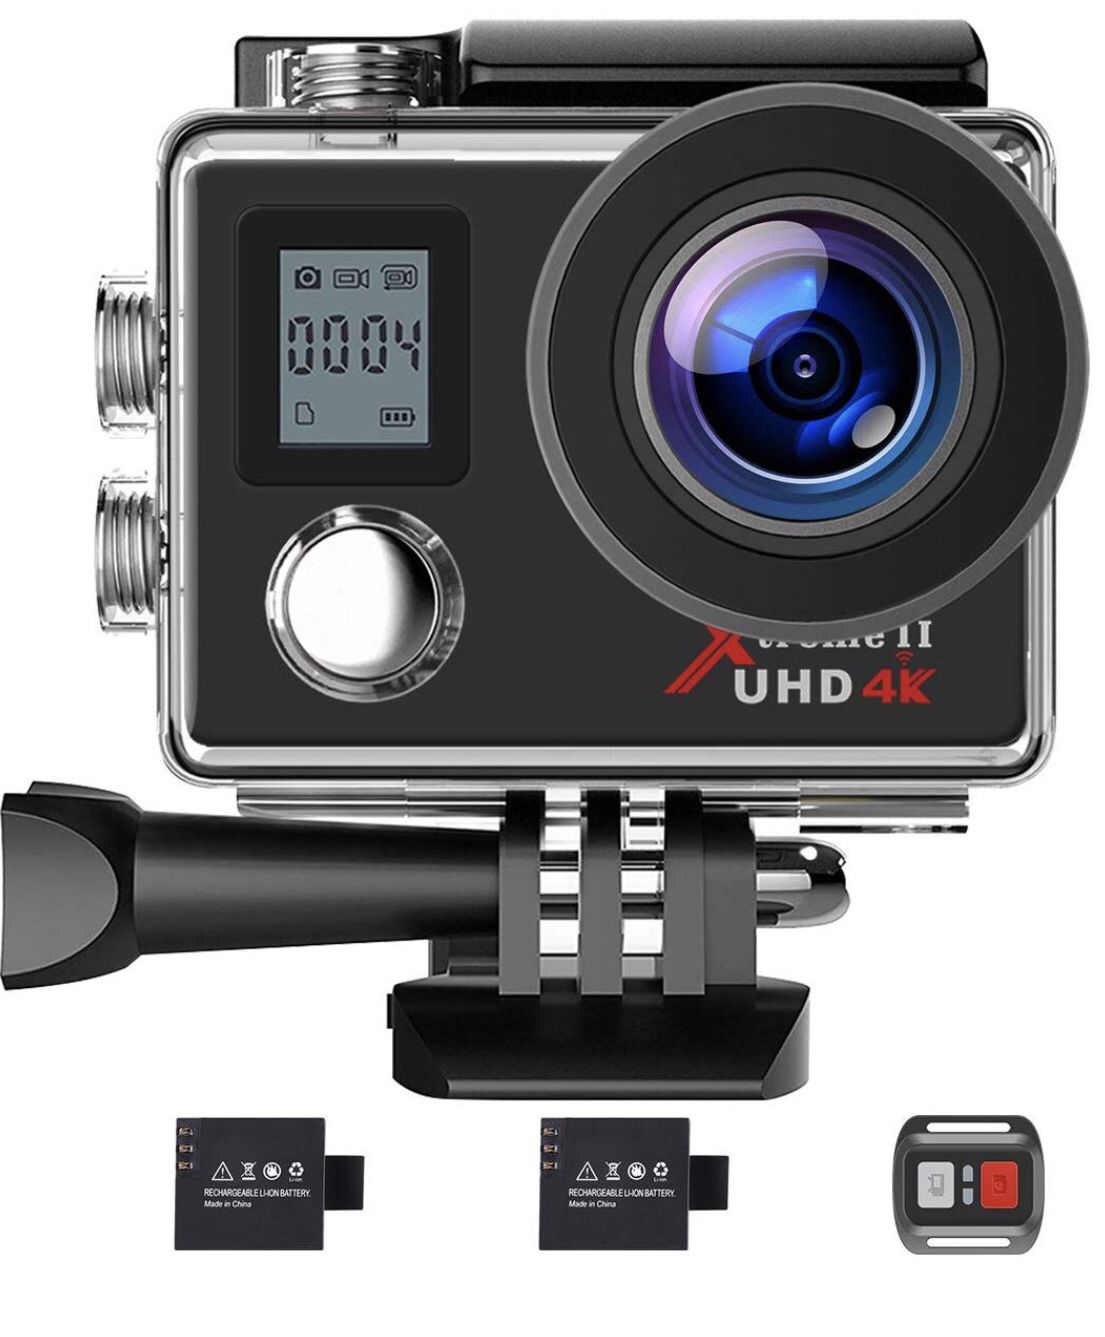 New — Sports Action Camera 4K WiFi Ultra HD Sports Cam Under water Waterproof 30M 170°Wide-Angle Lens with Remote Control 2 Recharge Batteries